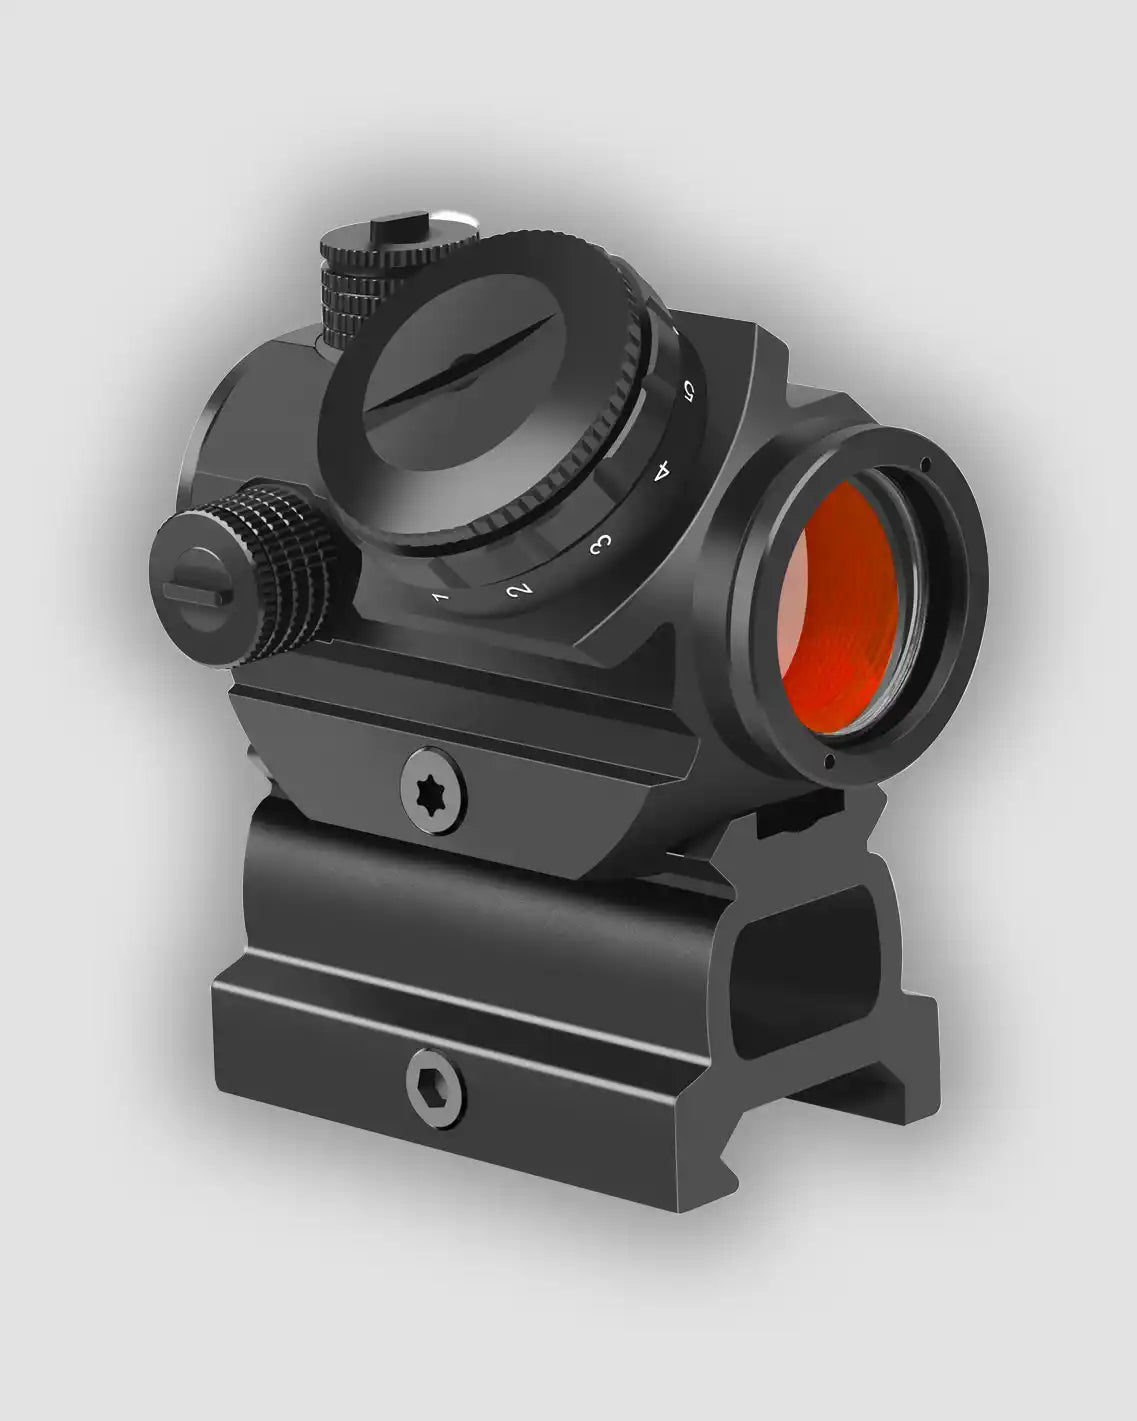 Feyachi RDS-23 Micro Red Dot Sight - Compact avec support de montage